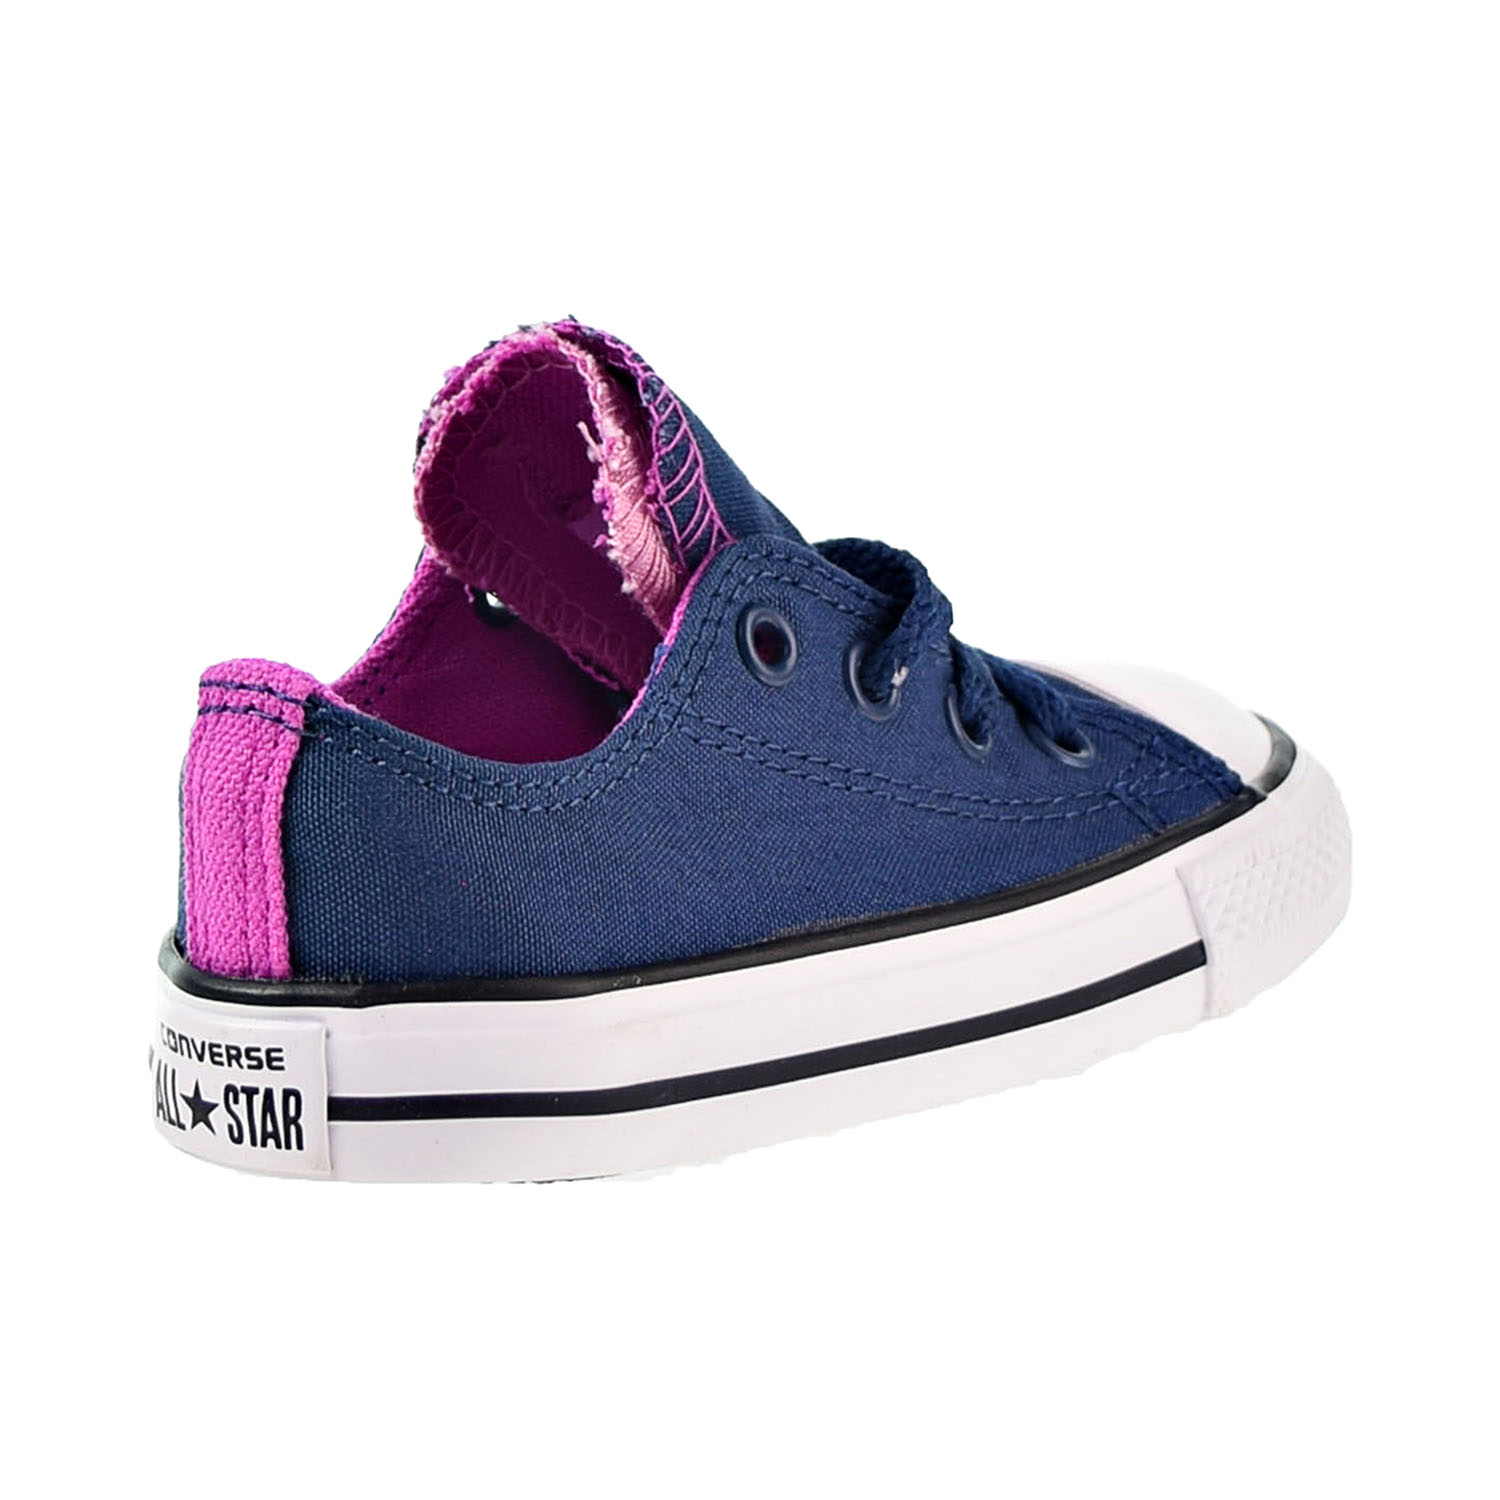 Converse Chuck Taylor All Star Double Toddler OX Toddler's Shoes Navy 760001f - image 3 of 6